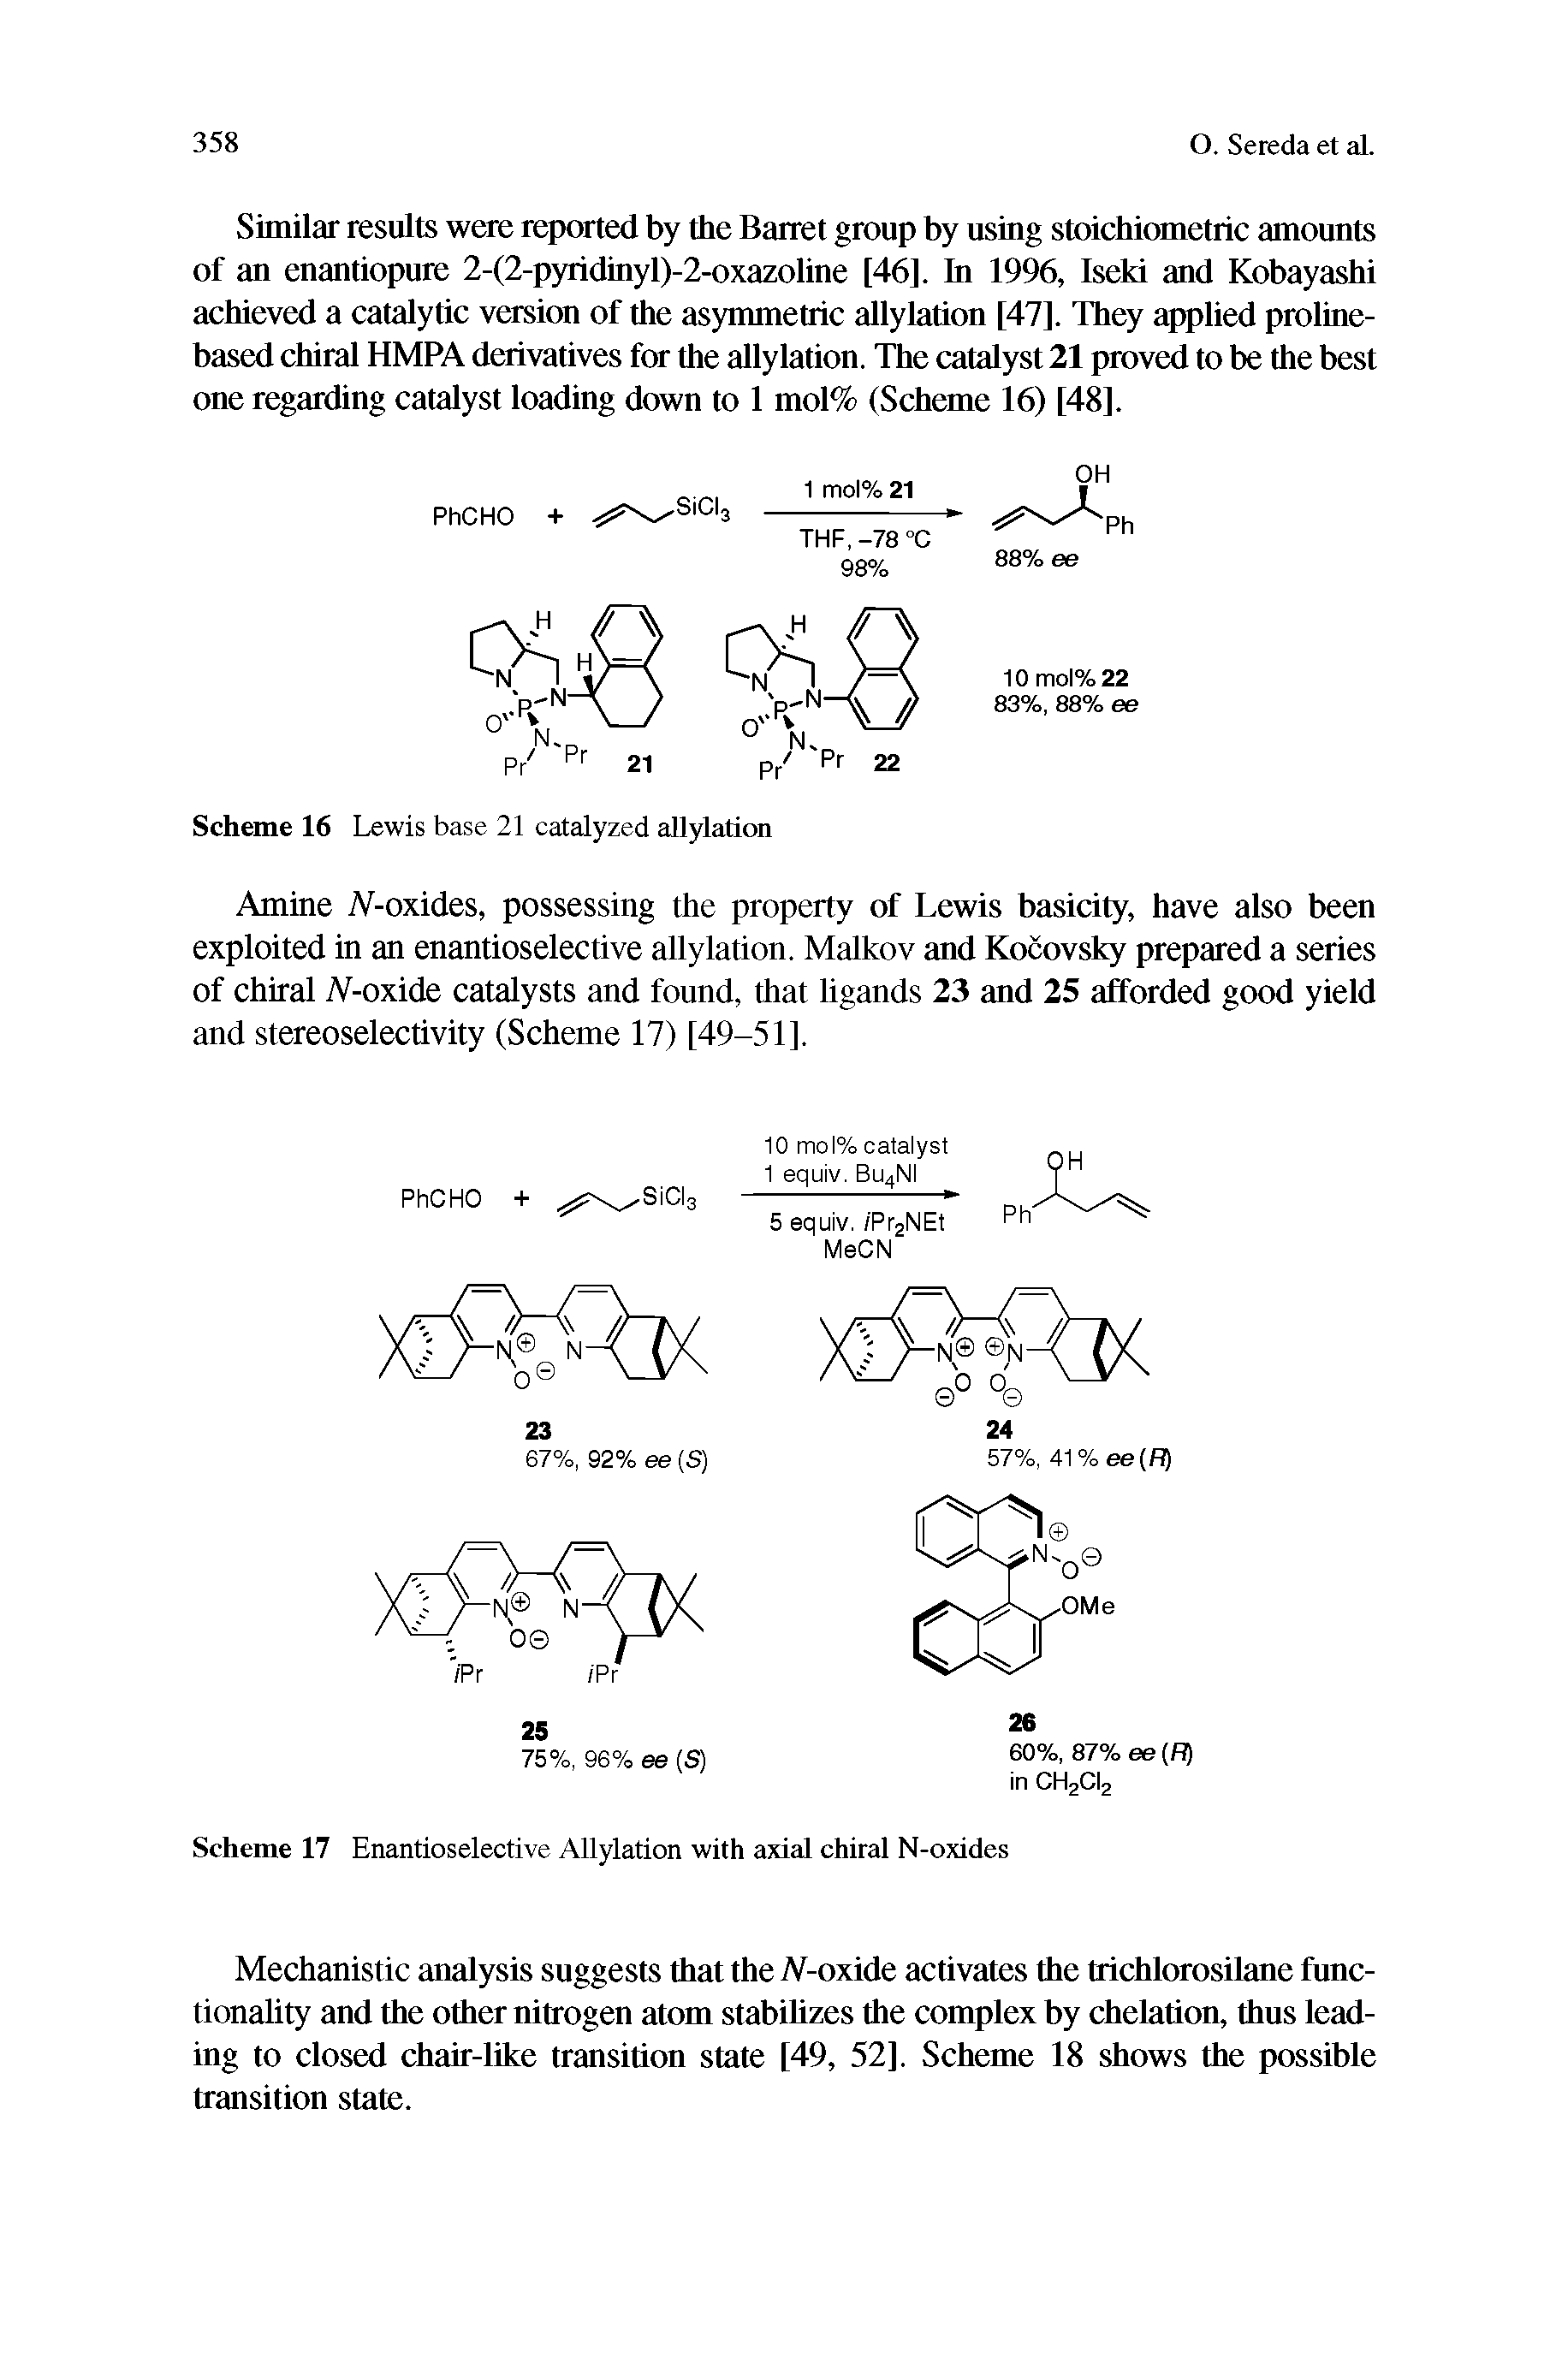 Scheme 17 Enantioselective Allylation with axial chiral N-oxides...